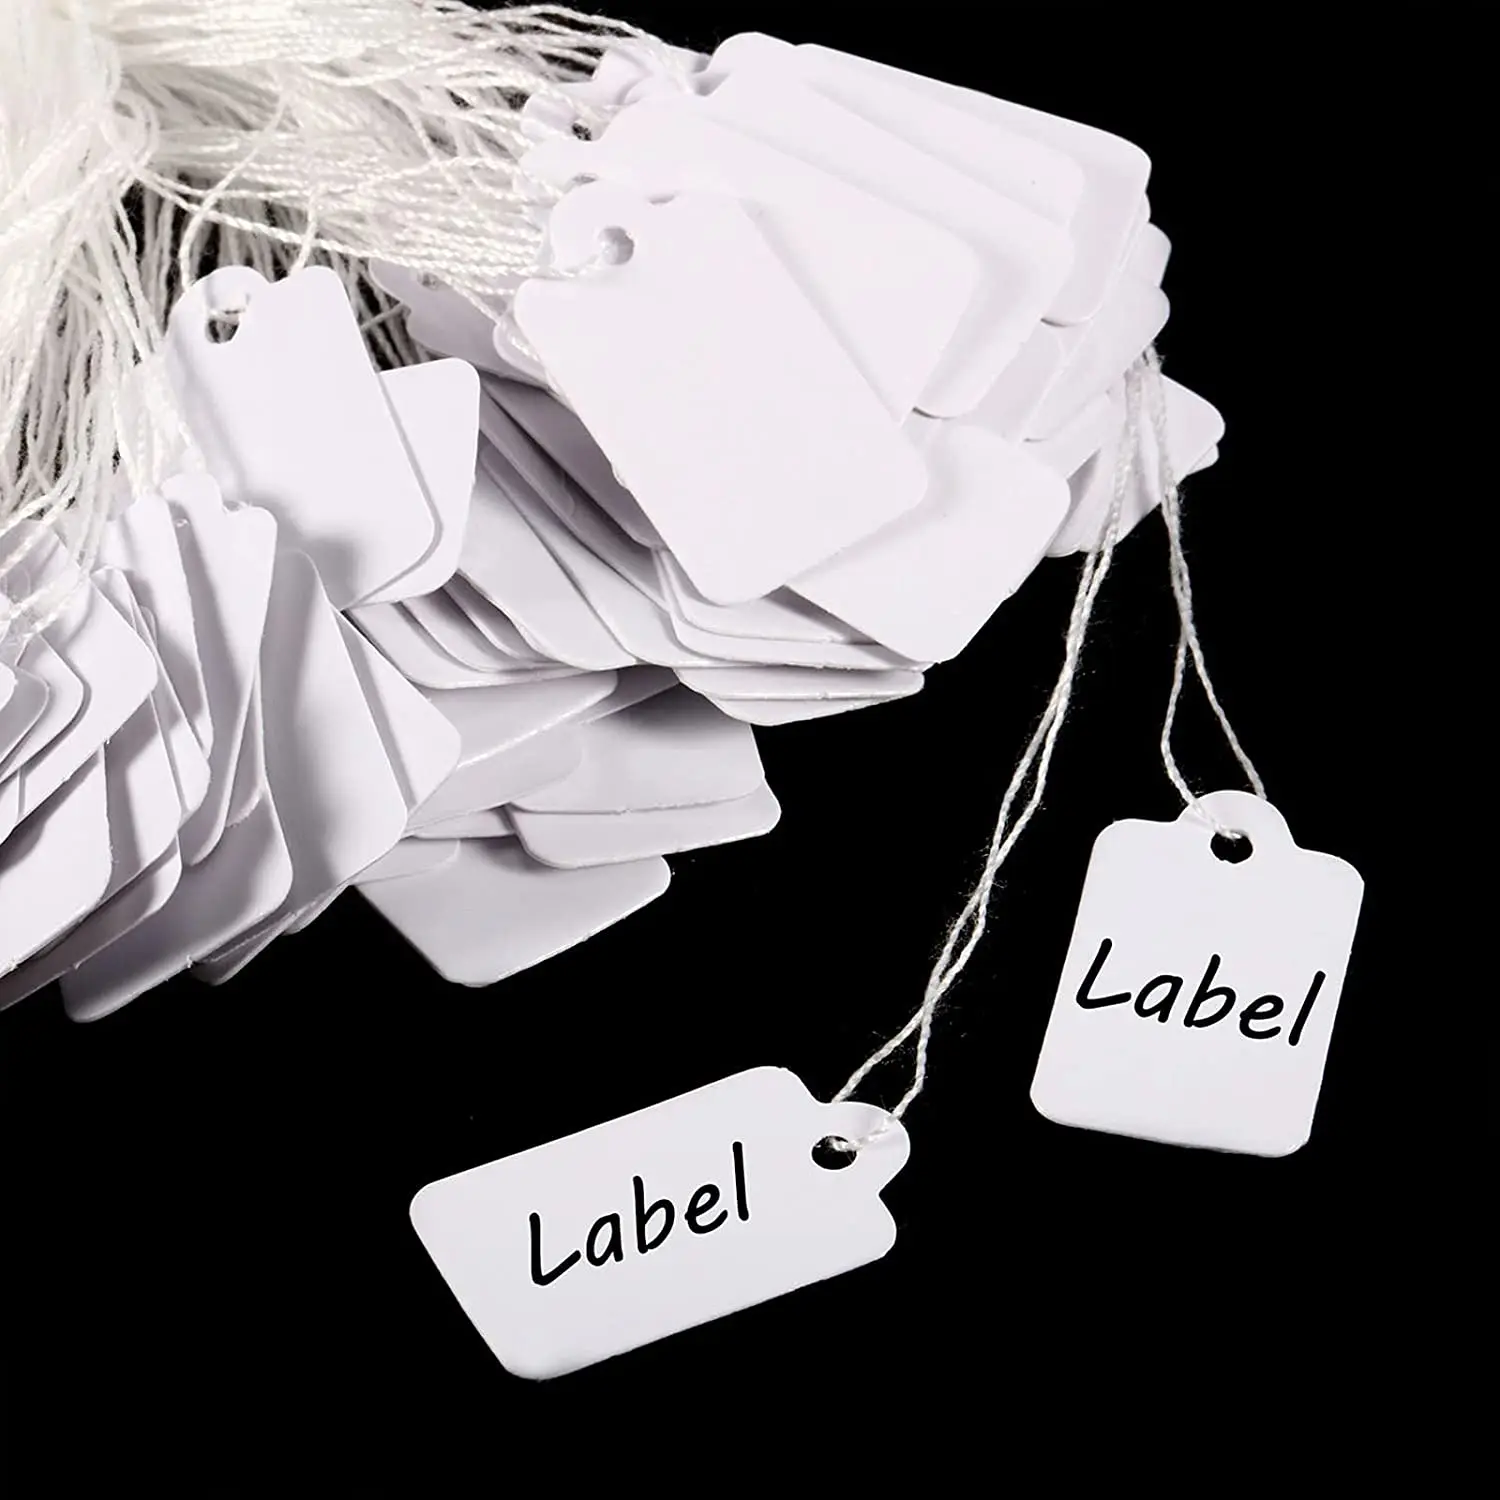 S12317f5652a24b82a53b391e251daaeck 100pcs 12x23mm Rectangular Paper Price Tag White Blank String Watch Jewelry Crafts Price Display Cards Promotion Label For Sales